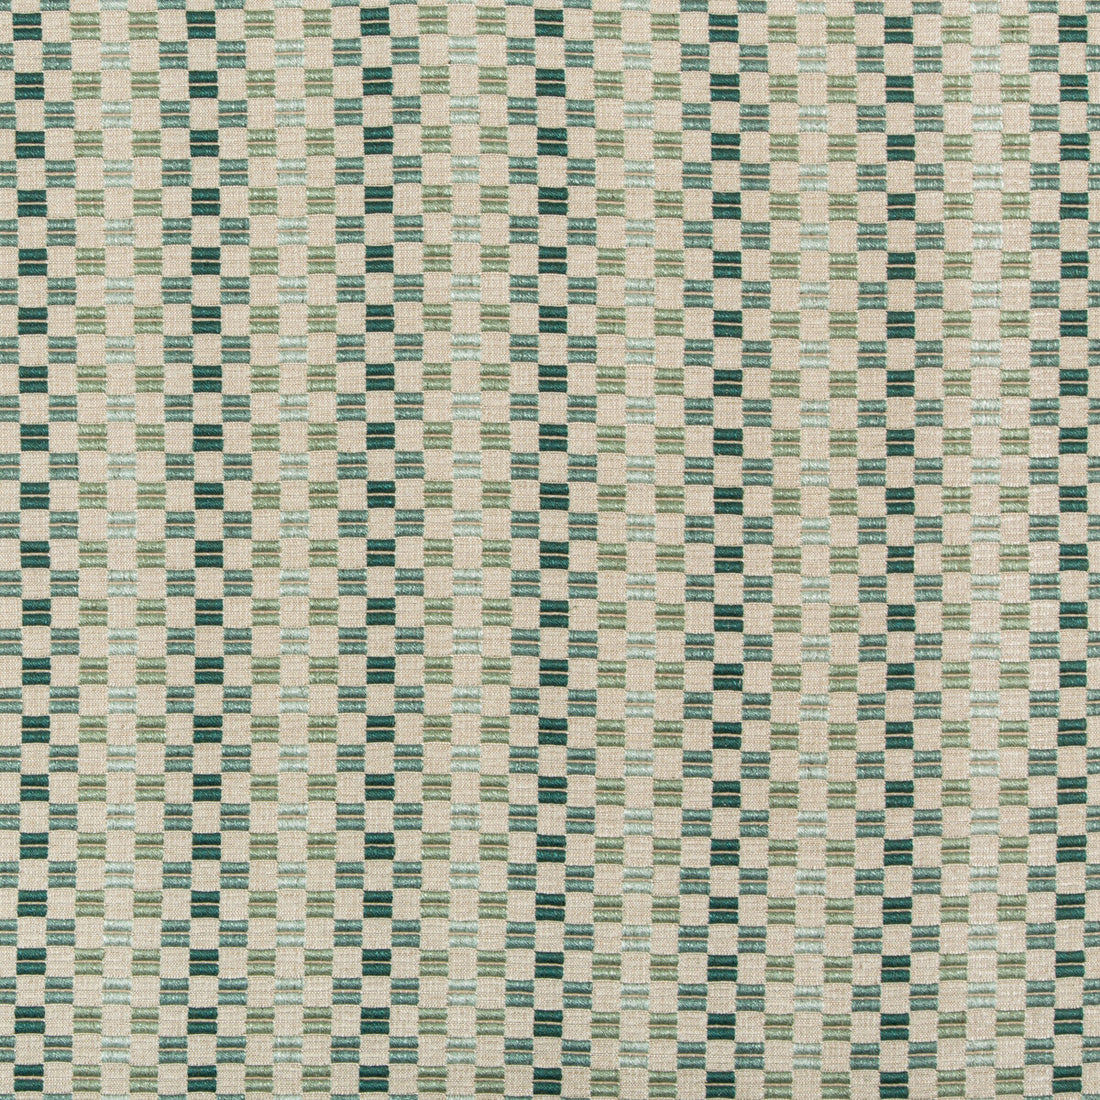 Vernazza fabric in jade color - pattern 35766.1623.0 - by Kravet Couture in the Modern Colors-Sojourn Collection collection